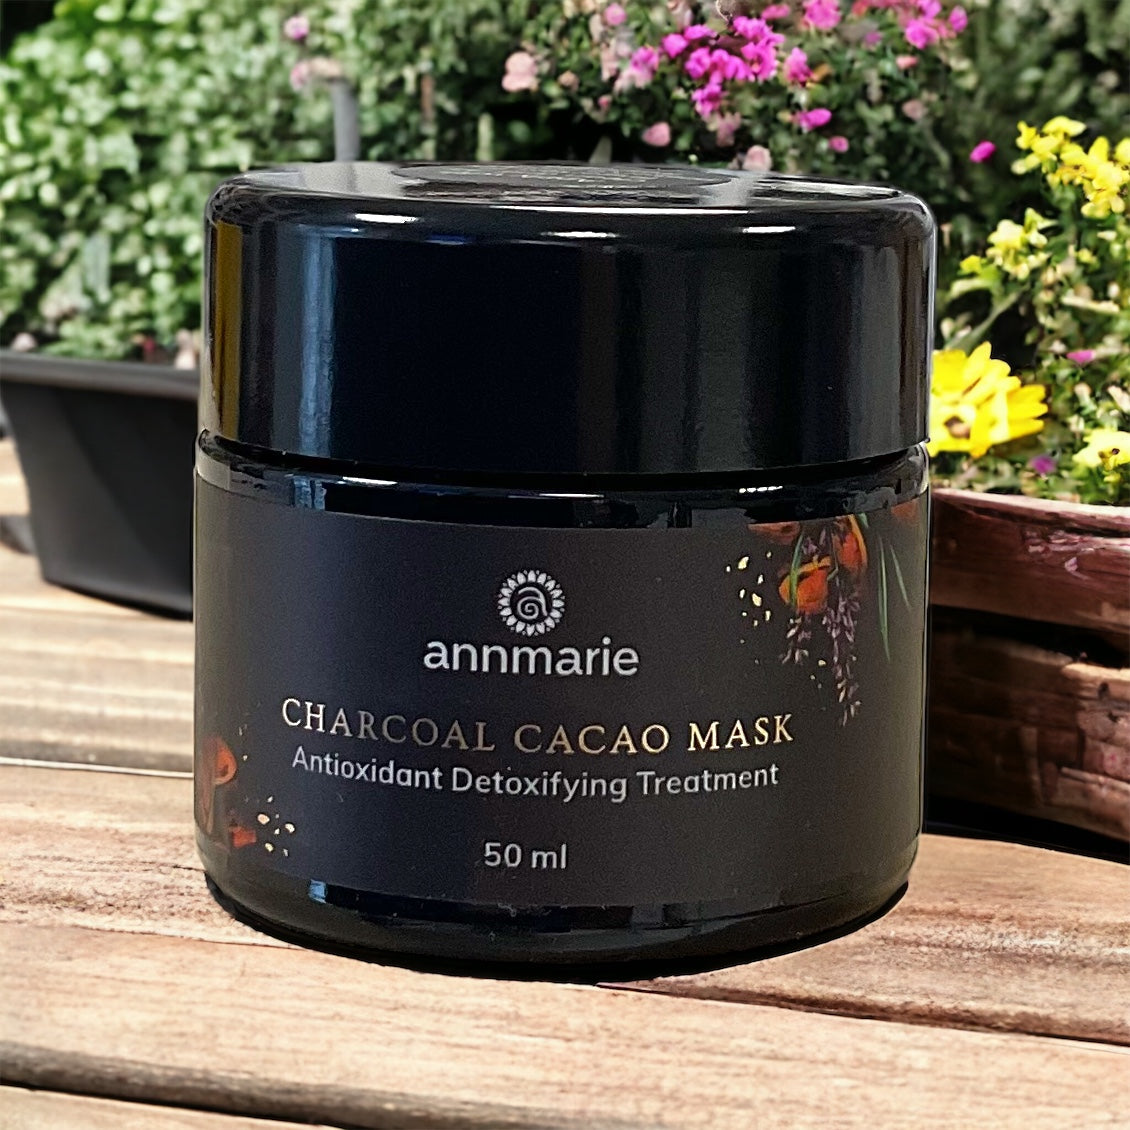 Charcoal Cacao Mask 50ml - Annemarie Skin Care